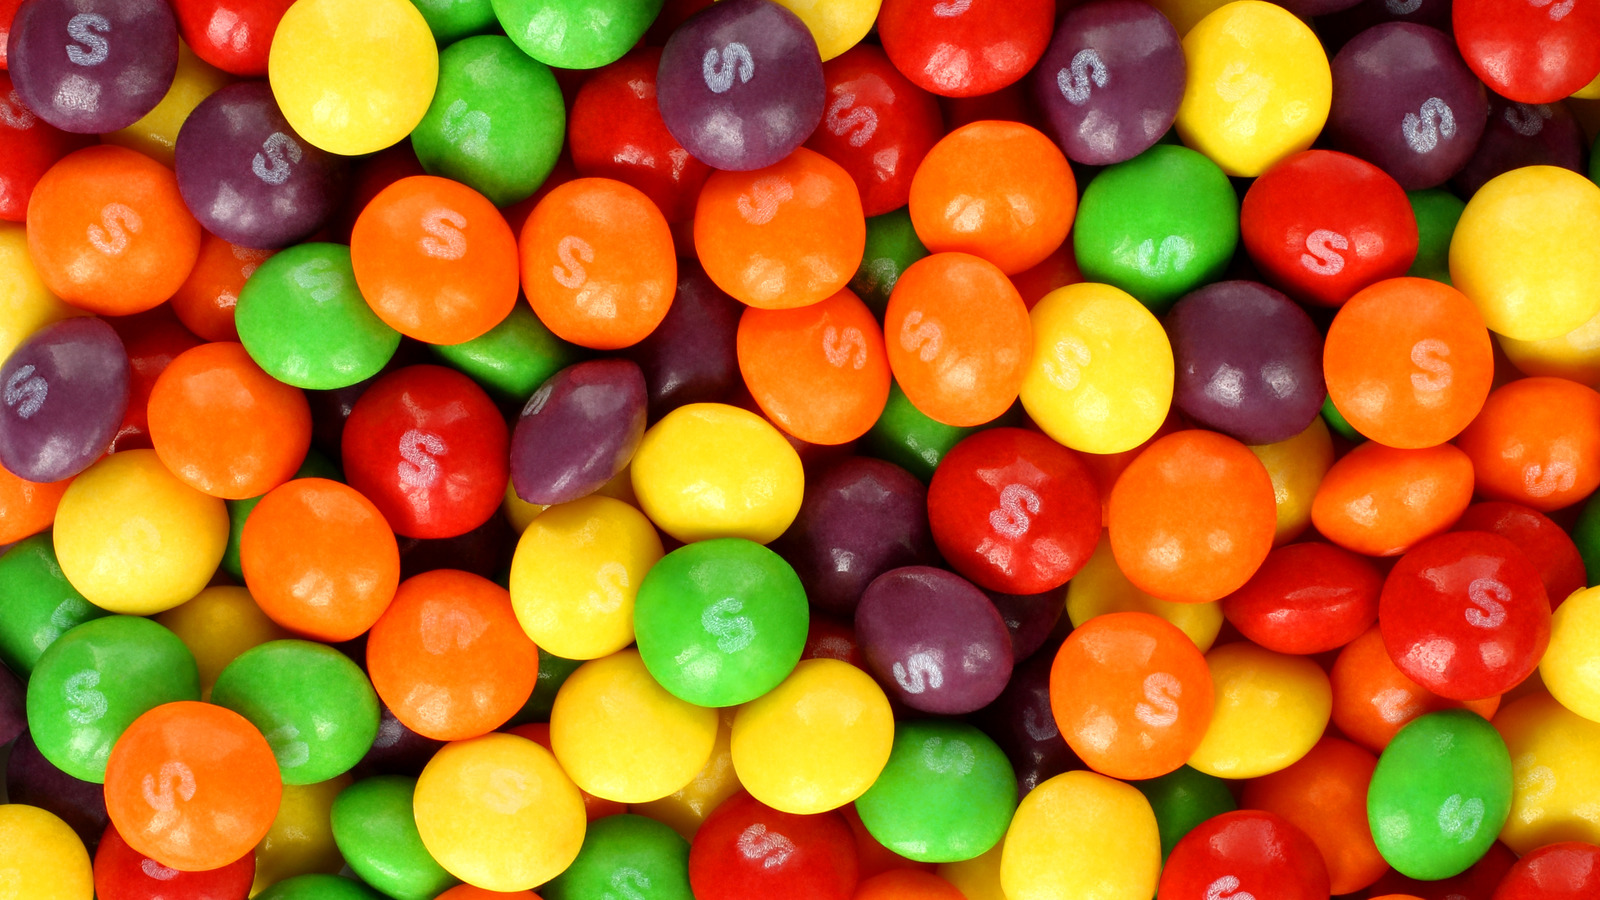 11 M&M's Flavors, Ranked Worst To Best